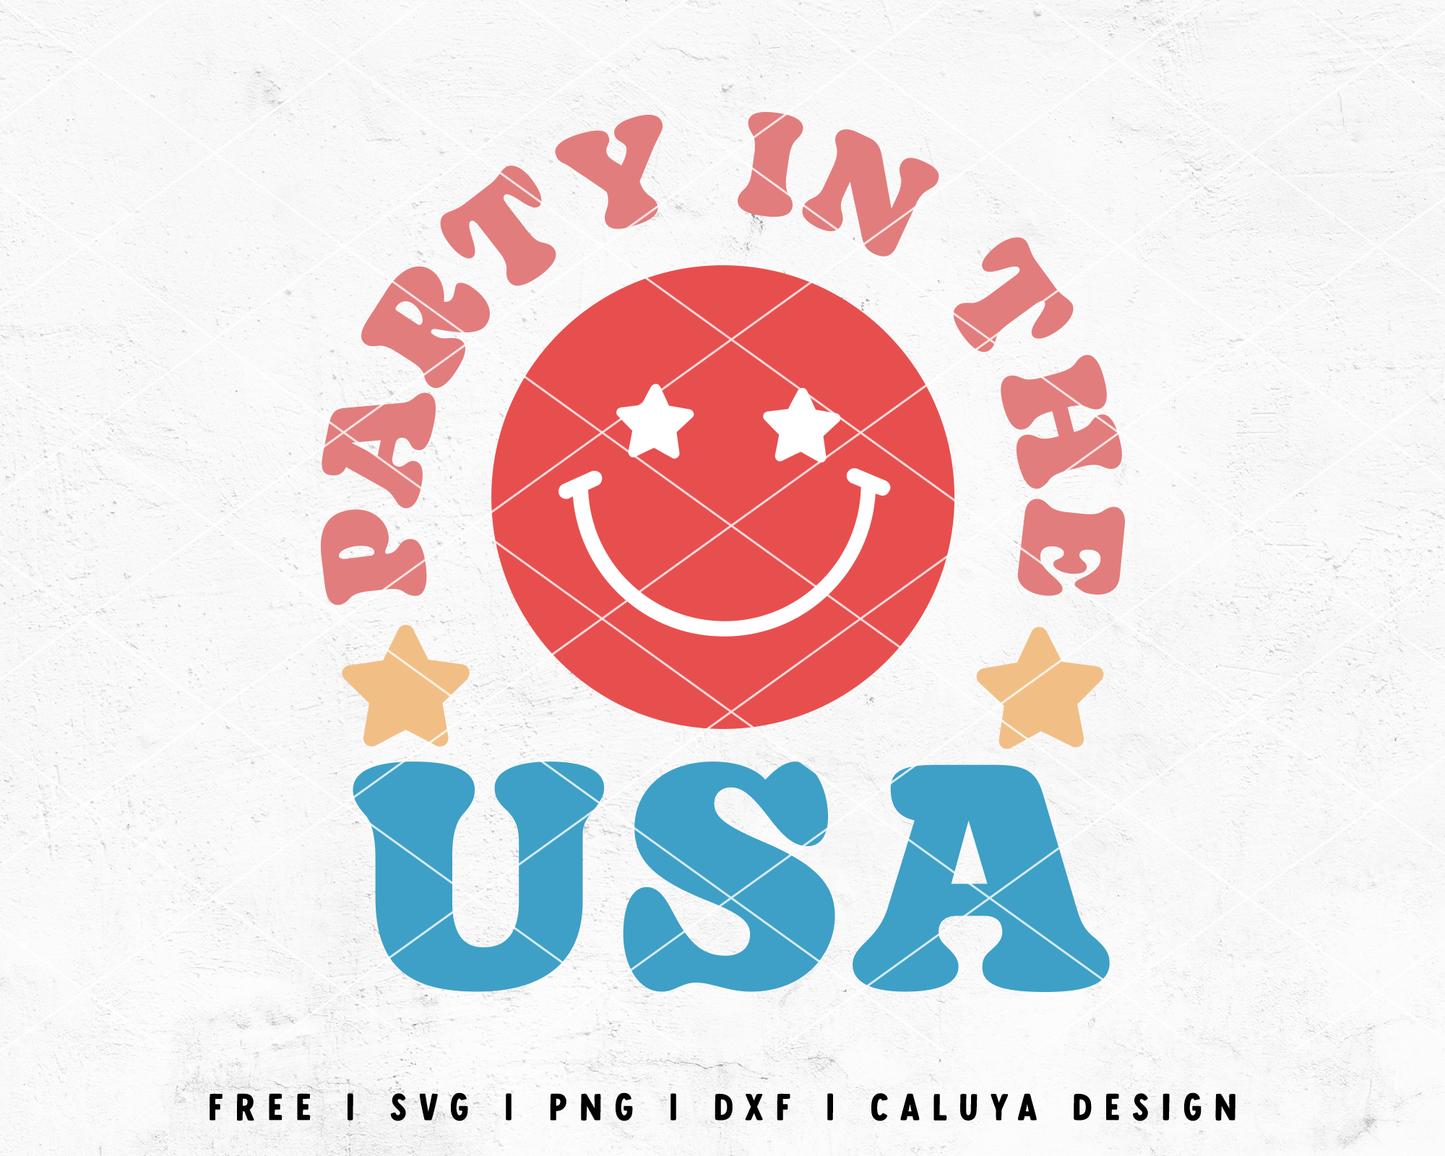 FREE Party In The USA SVG | Retro July 4th SVG Cut File for Cricut, Cameo Silhouette | Free SVG Cut File